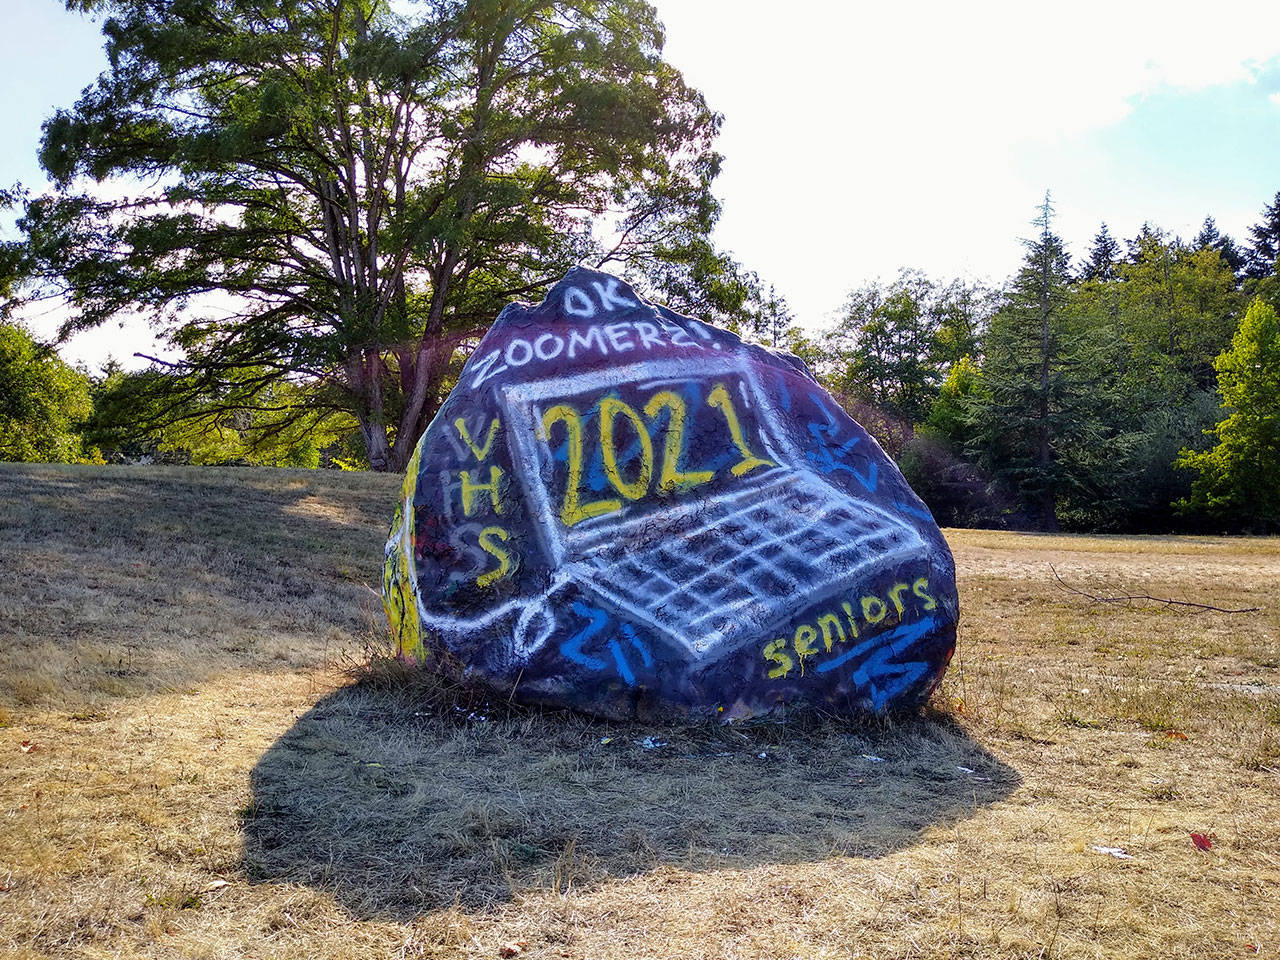 In preparation for the first day of virtual classes at Vashon High School, staff painted the rock on campus to welcome students on material distribution day (Paul Rowley/Staff Photo).